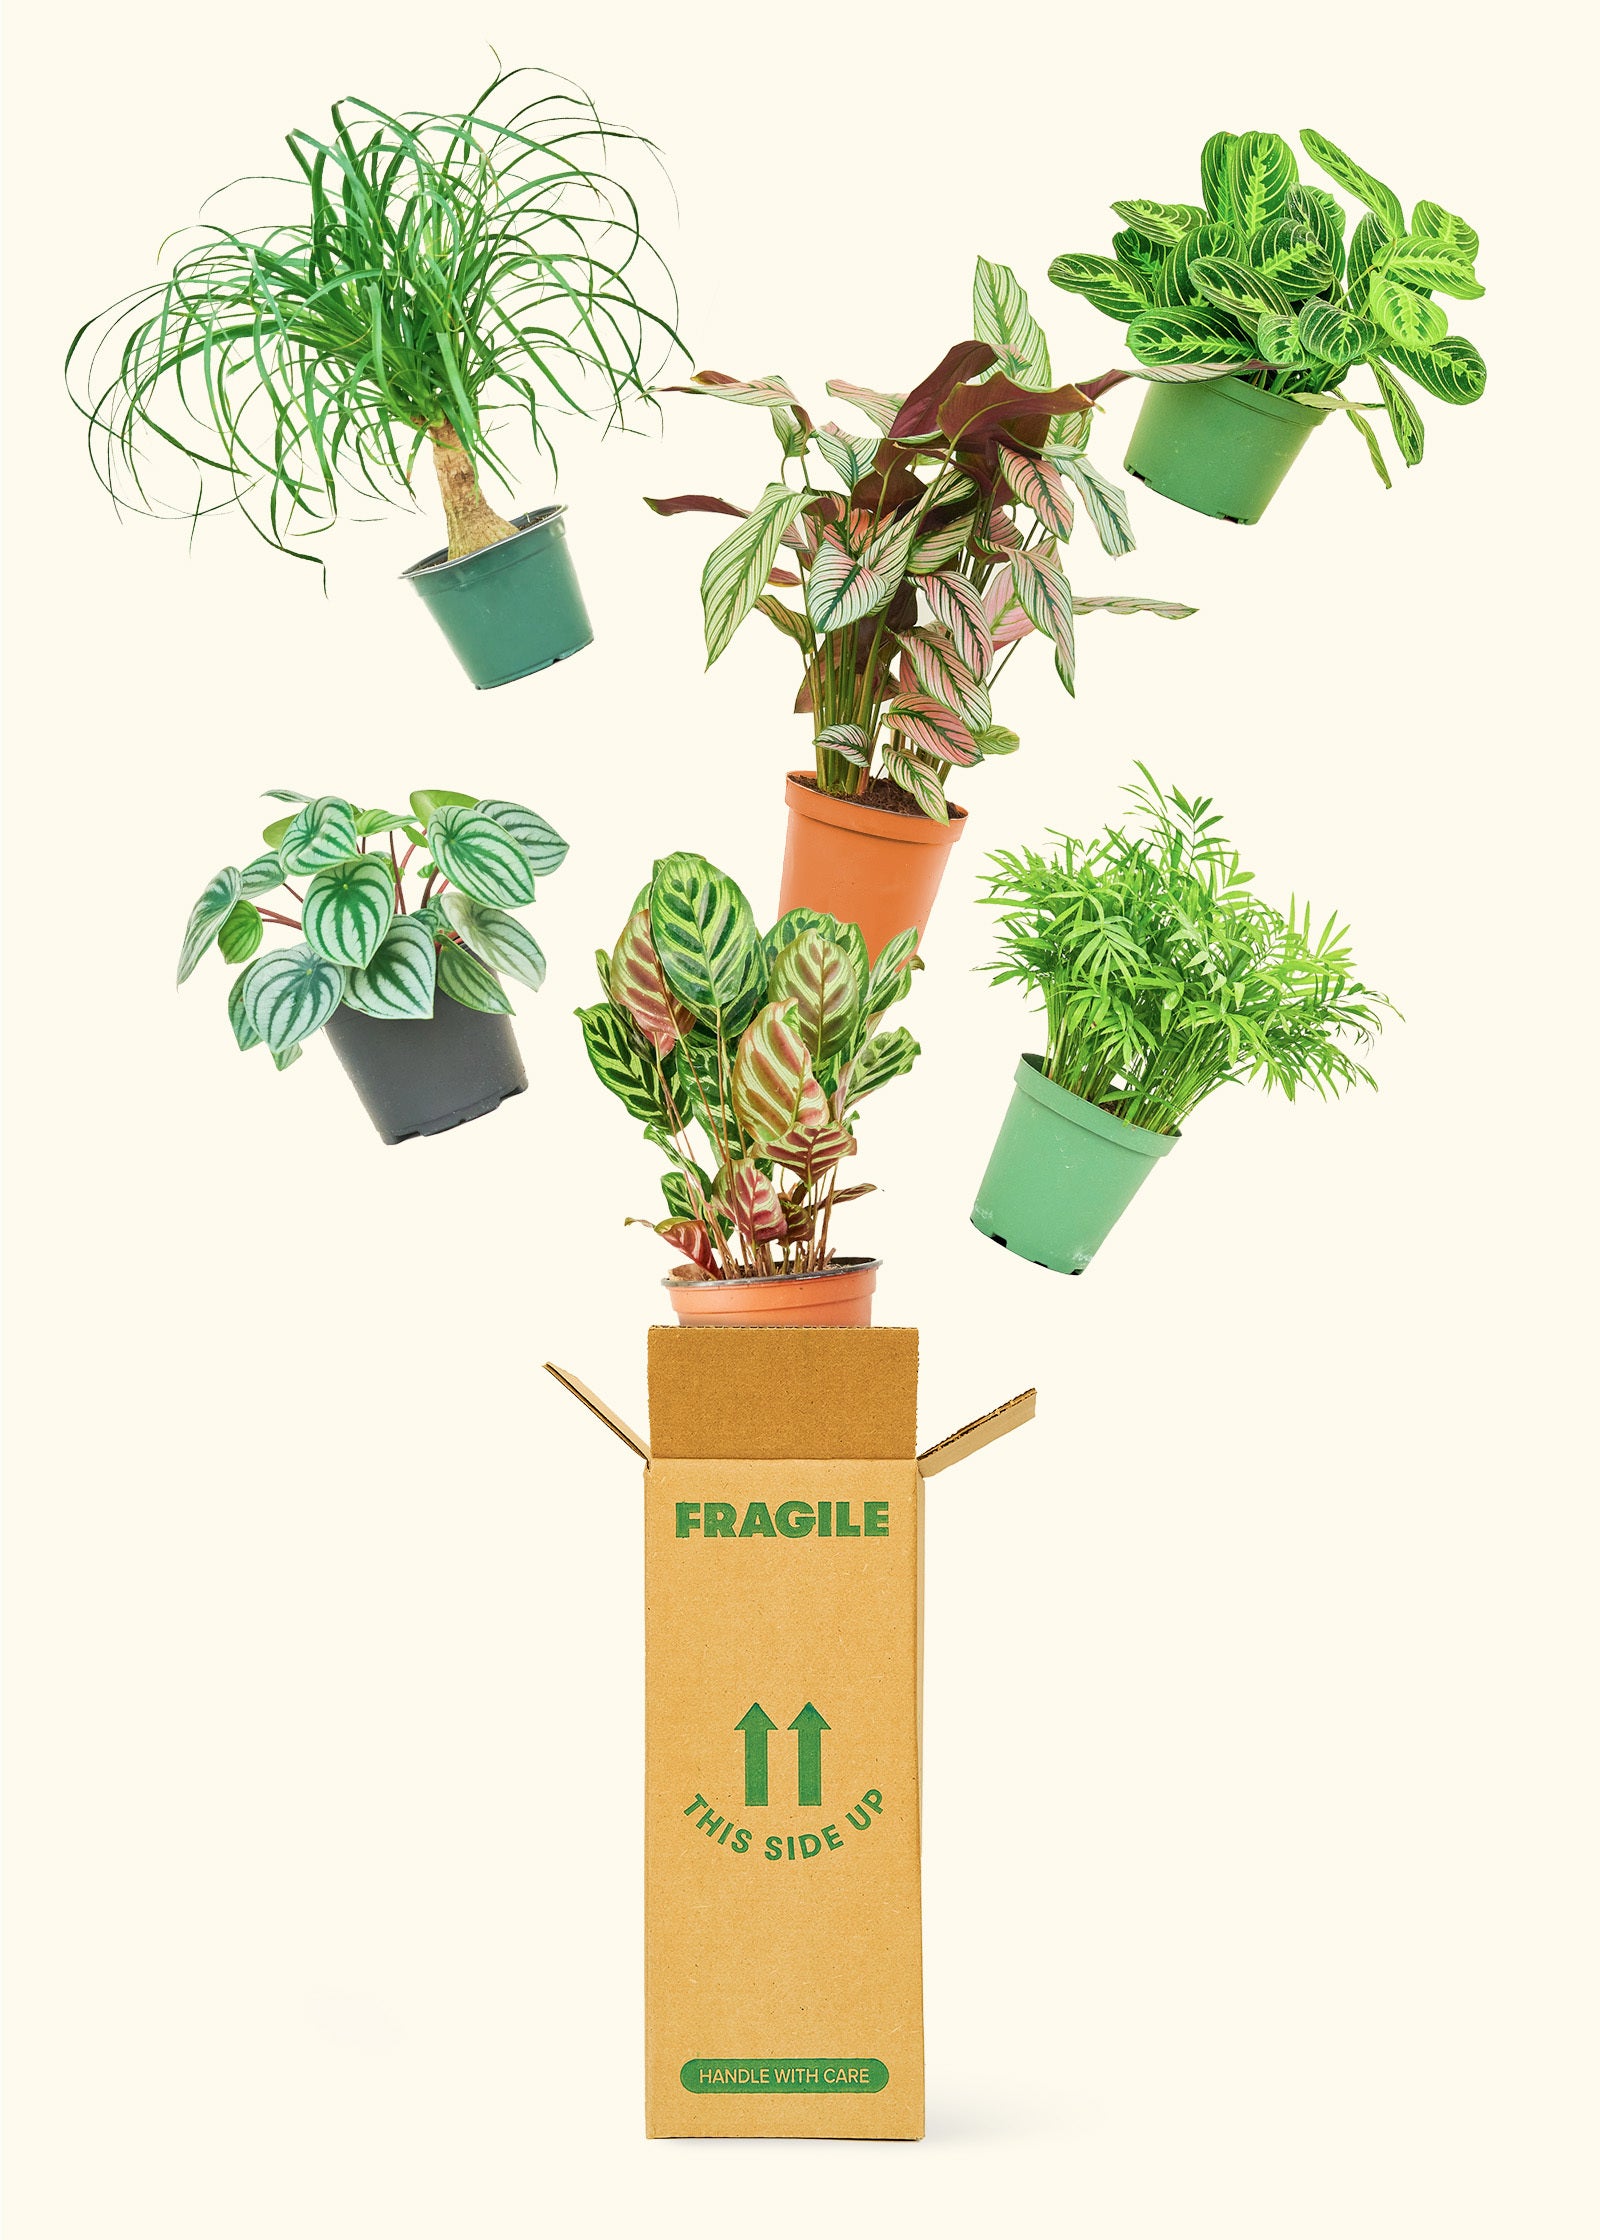 Six 6" pet-friendly plants in grow pots and a Rooted branded box.